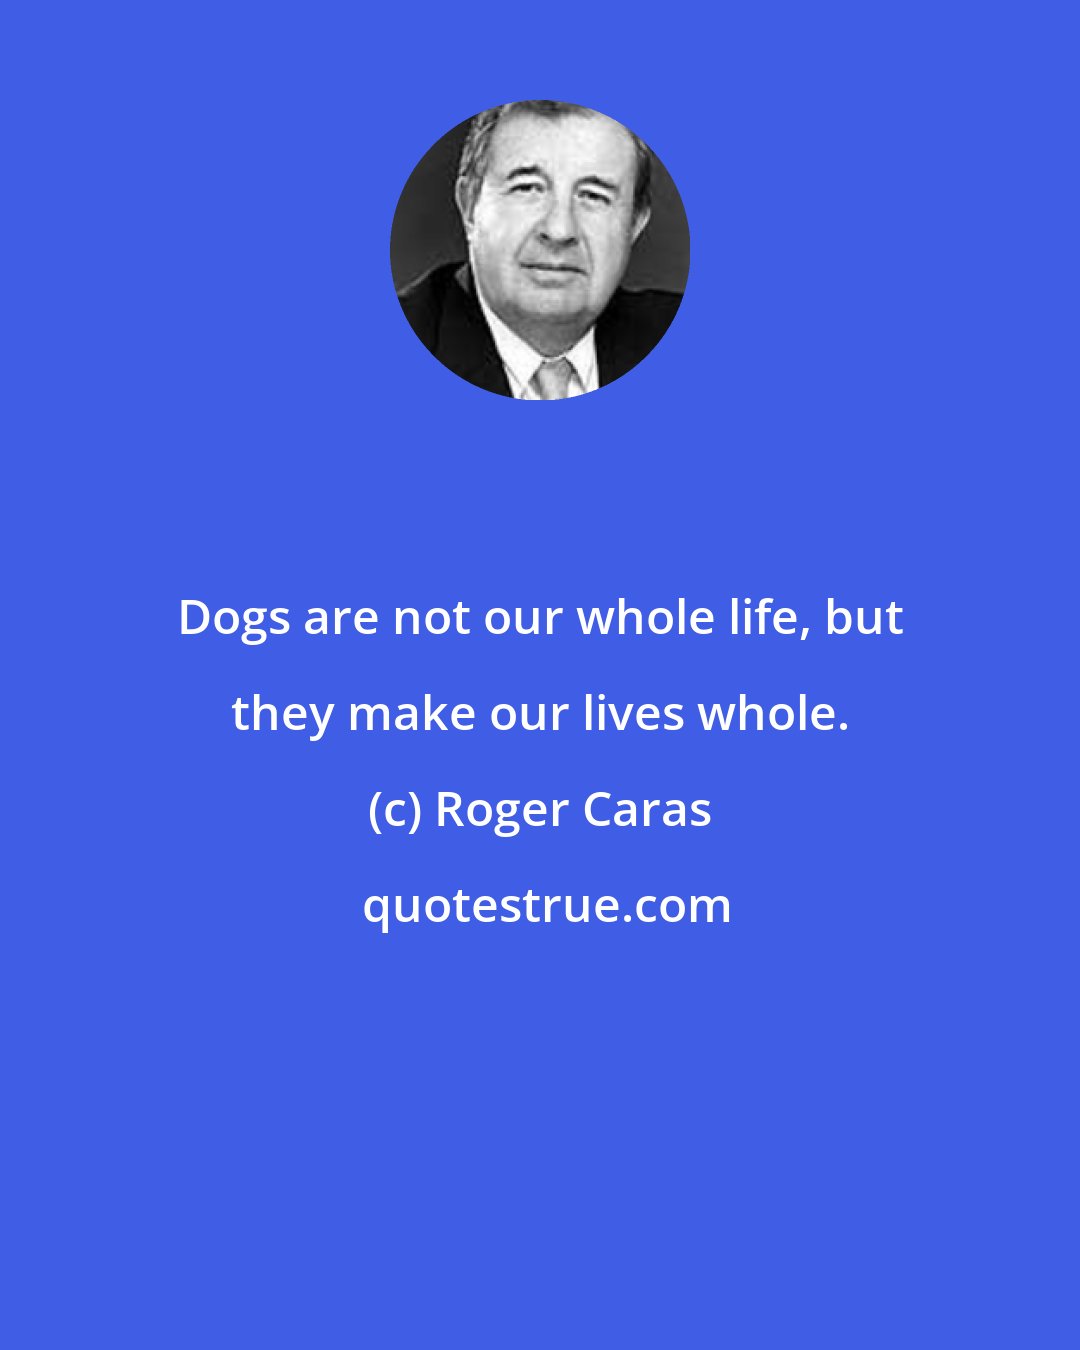 Roger Caras: Dogs are not our whole life, but they make our lives whole.